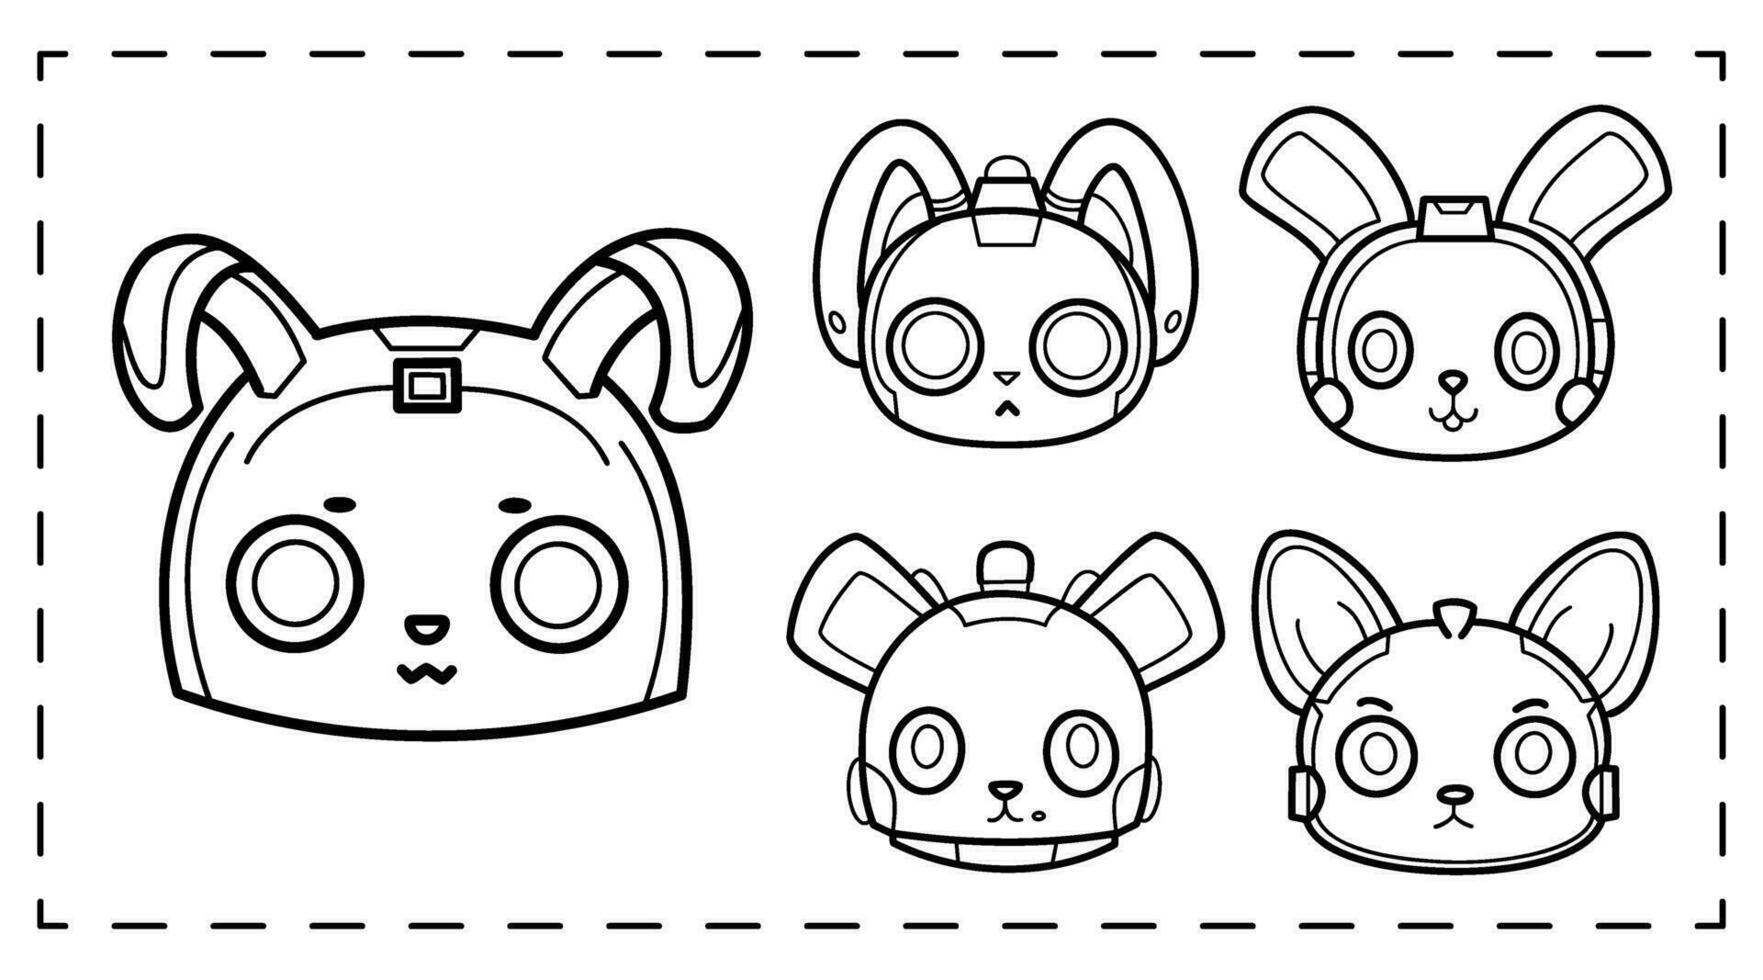 Cute rabbit robot cartoon faces, black outline isolated for coloring book, flat animal icons, vector illustration.